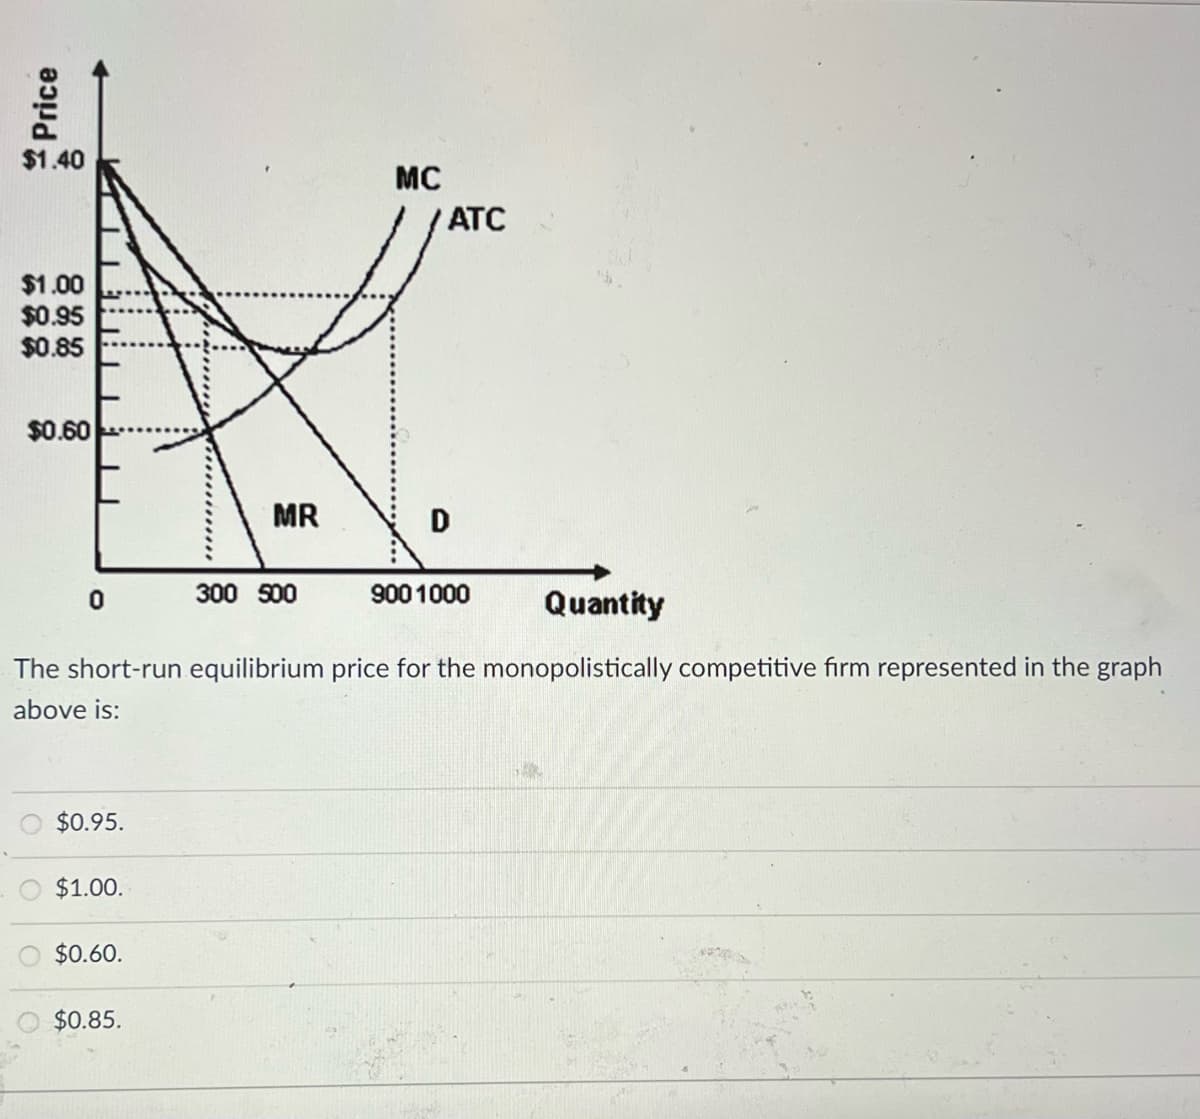 Price
$1.40
$1.00
$0.95
$0.85
$0.60
MC
WATC
D
0
300 500
900 1000
Quantity
The short-run equilibrium price for the monopolistically competitive firm represented in the graph
above is:
$0.95.
$1.00.
$0.60.
$0.85.
MR